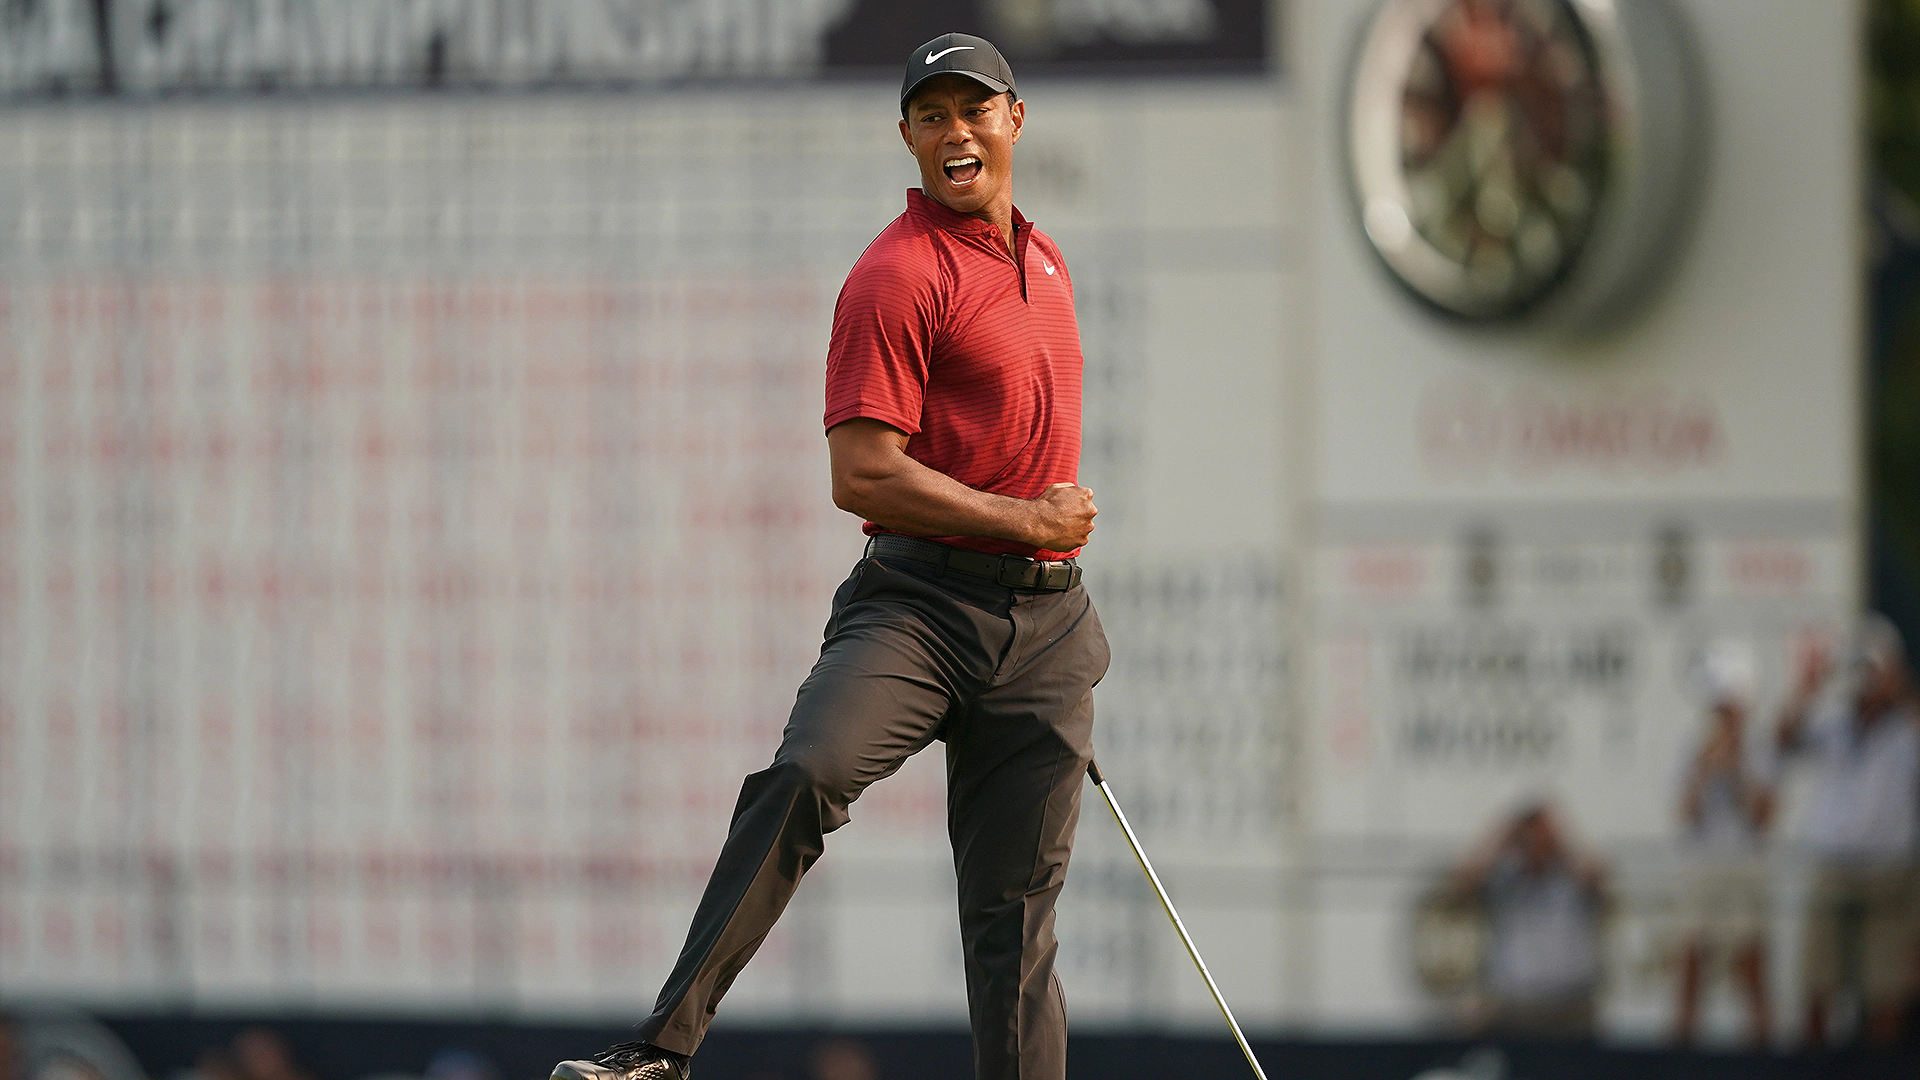 Podcast: Welcome our guest - Tiger Tracker